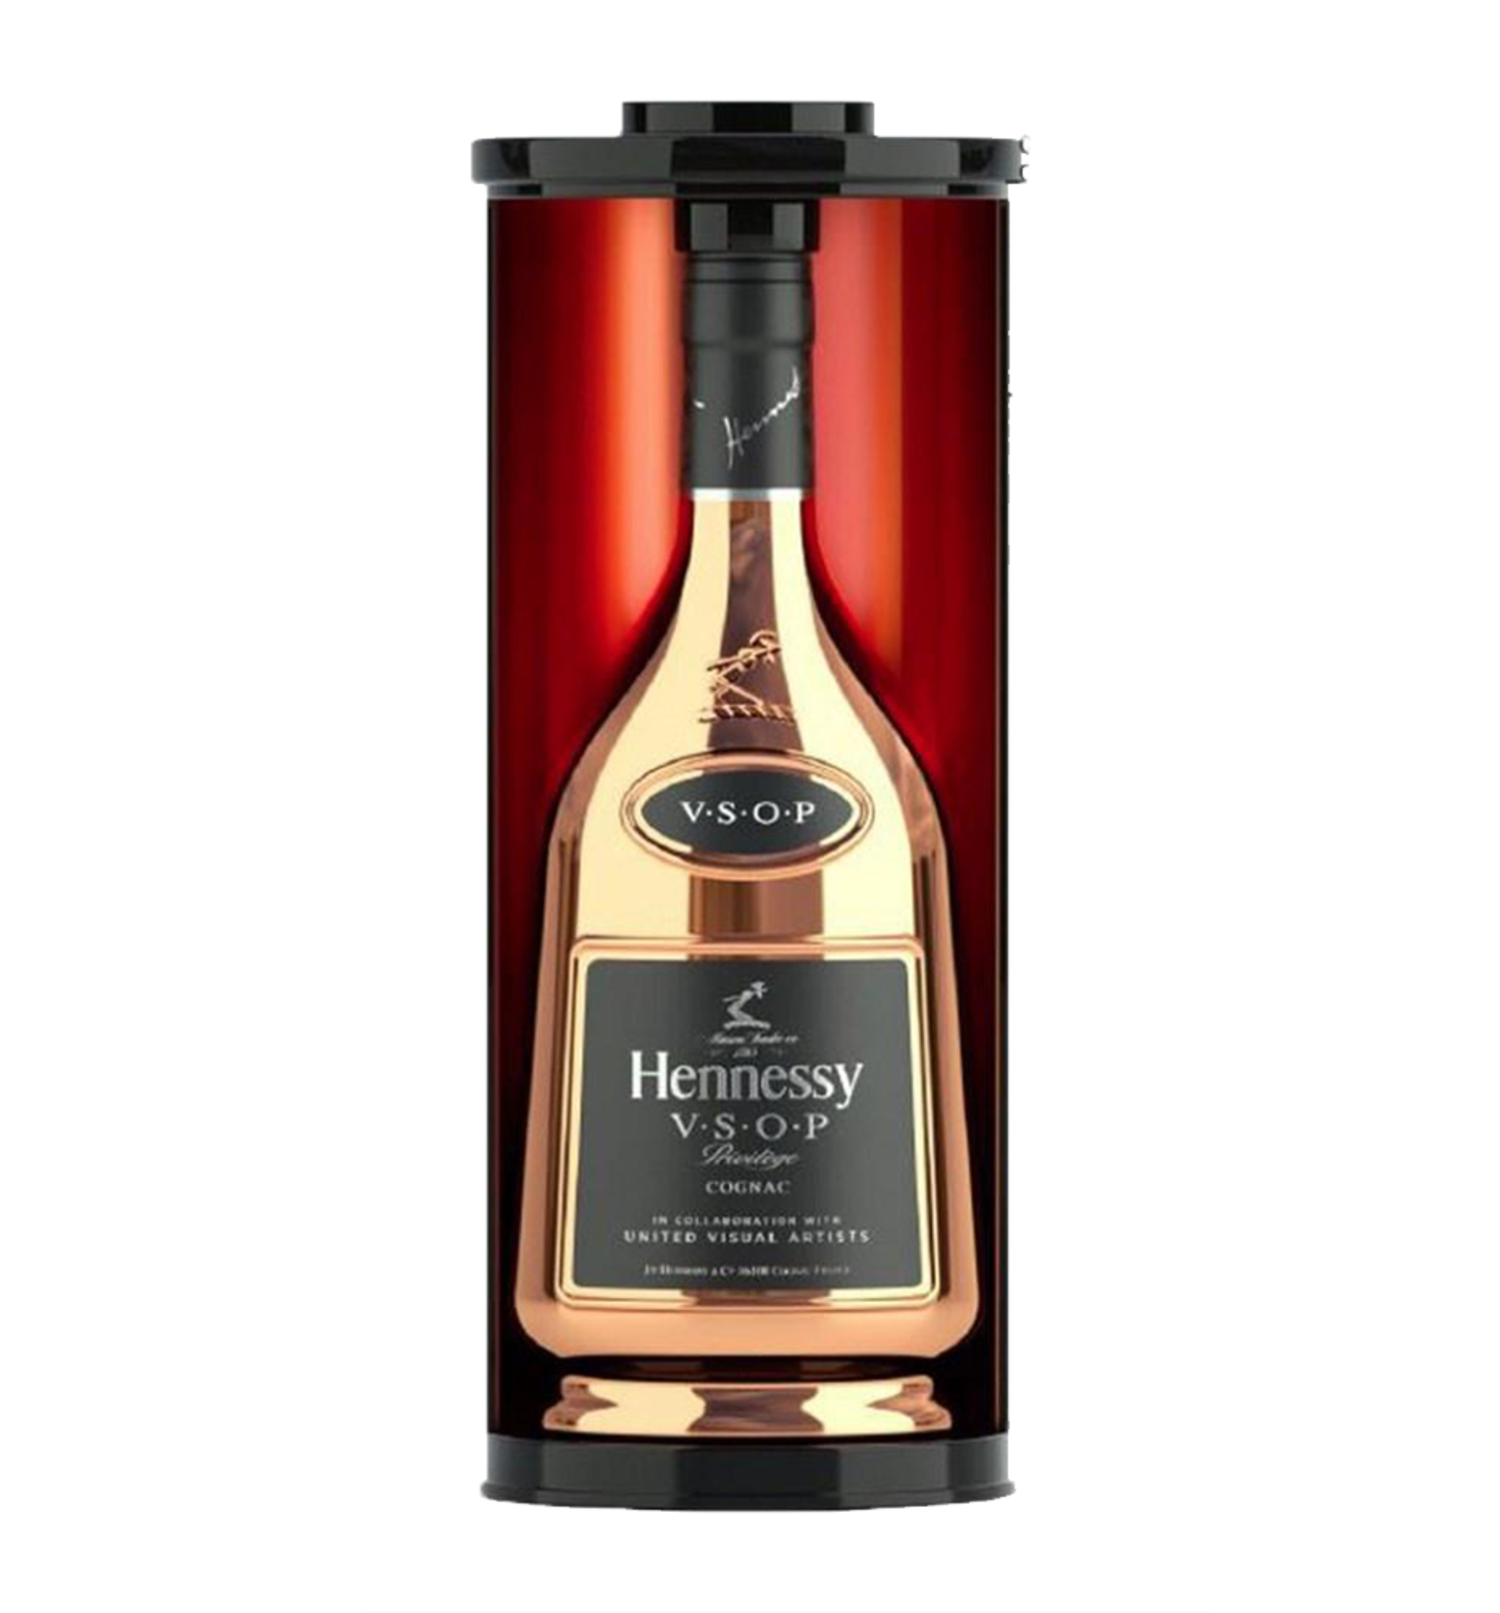 Moët Hennessy: Culture